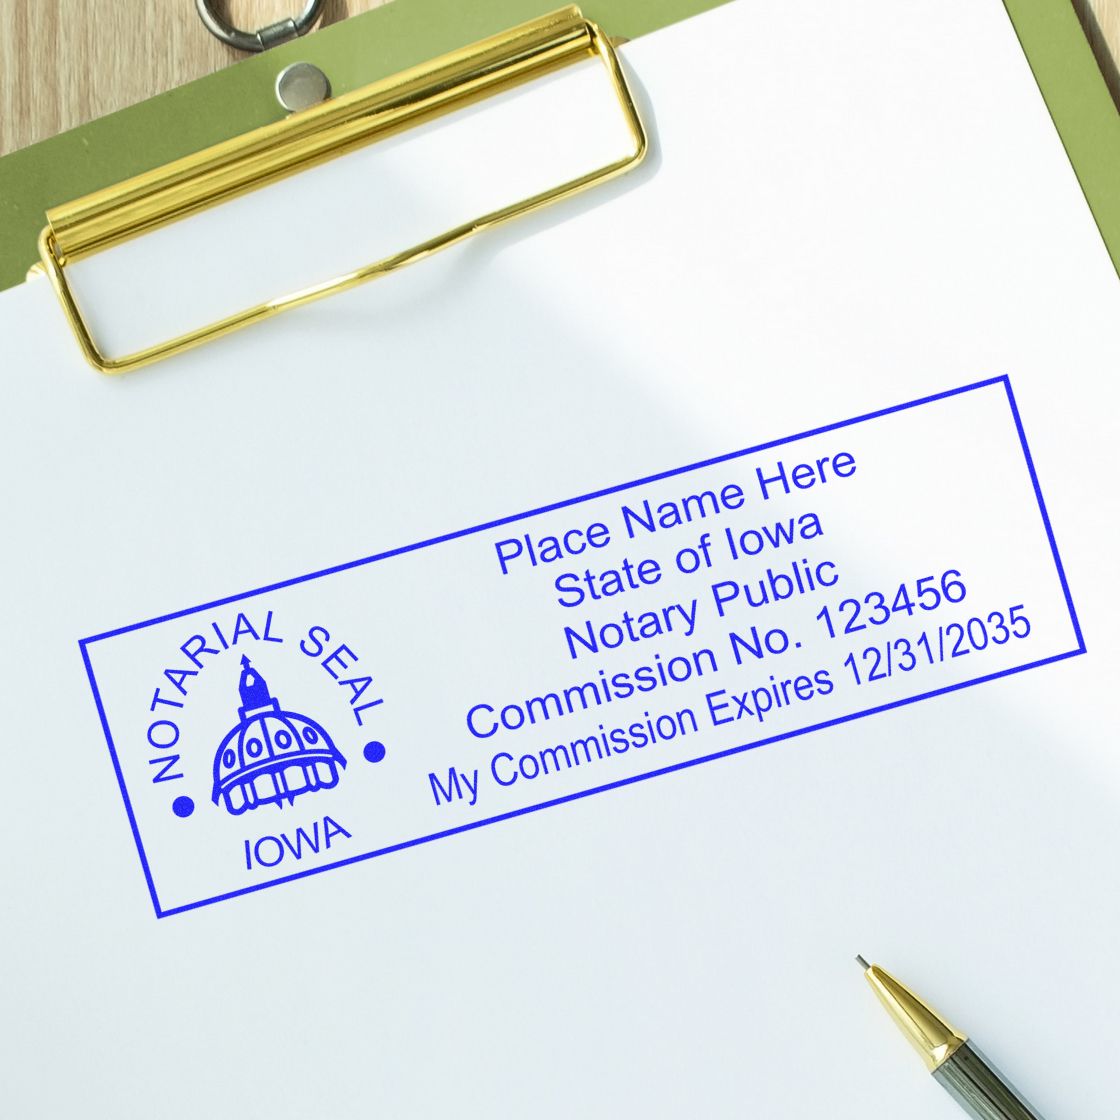 Slim Pre-Inked State Seal Notary Stamp for Iowa in use photo showing a stamped imprint of the Slim Pre-Inked State Seal Notary Stamp for Iowa